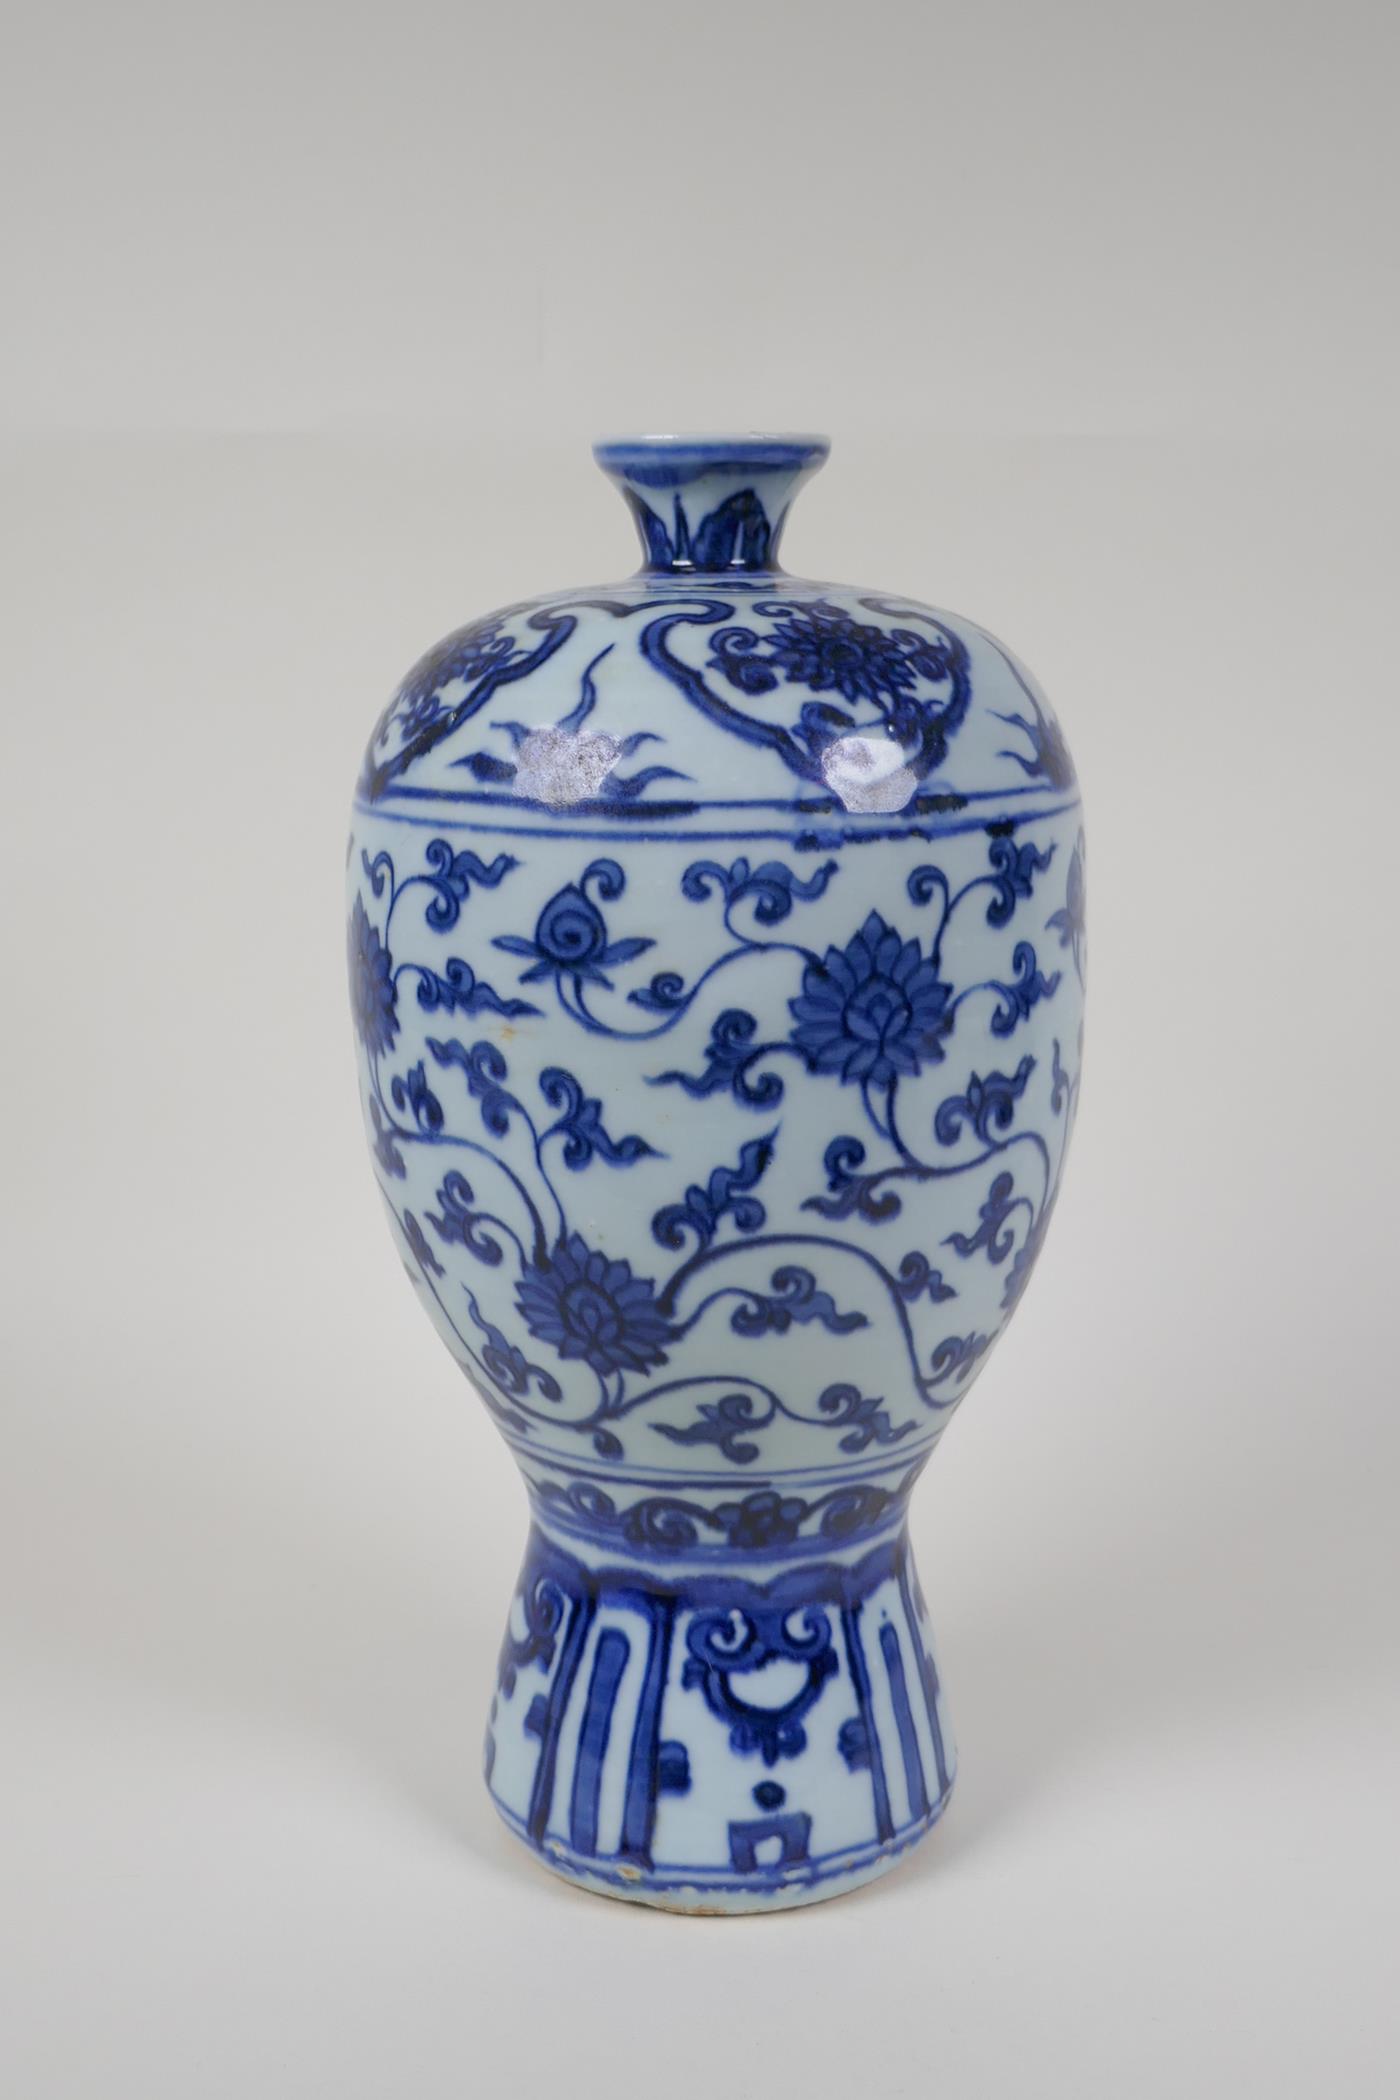 A Chinese ming style blue and white porcelain vase with scrolling lotus flower pattern, 11½" high - Image 4 of 8